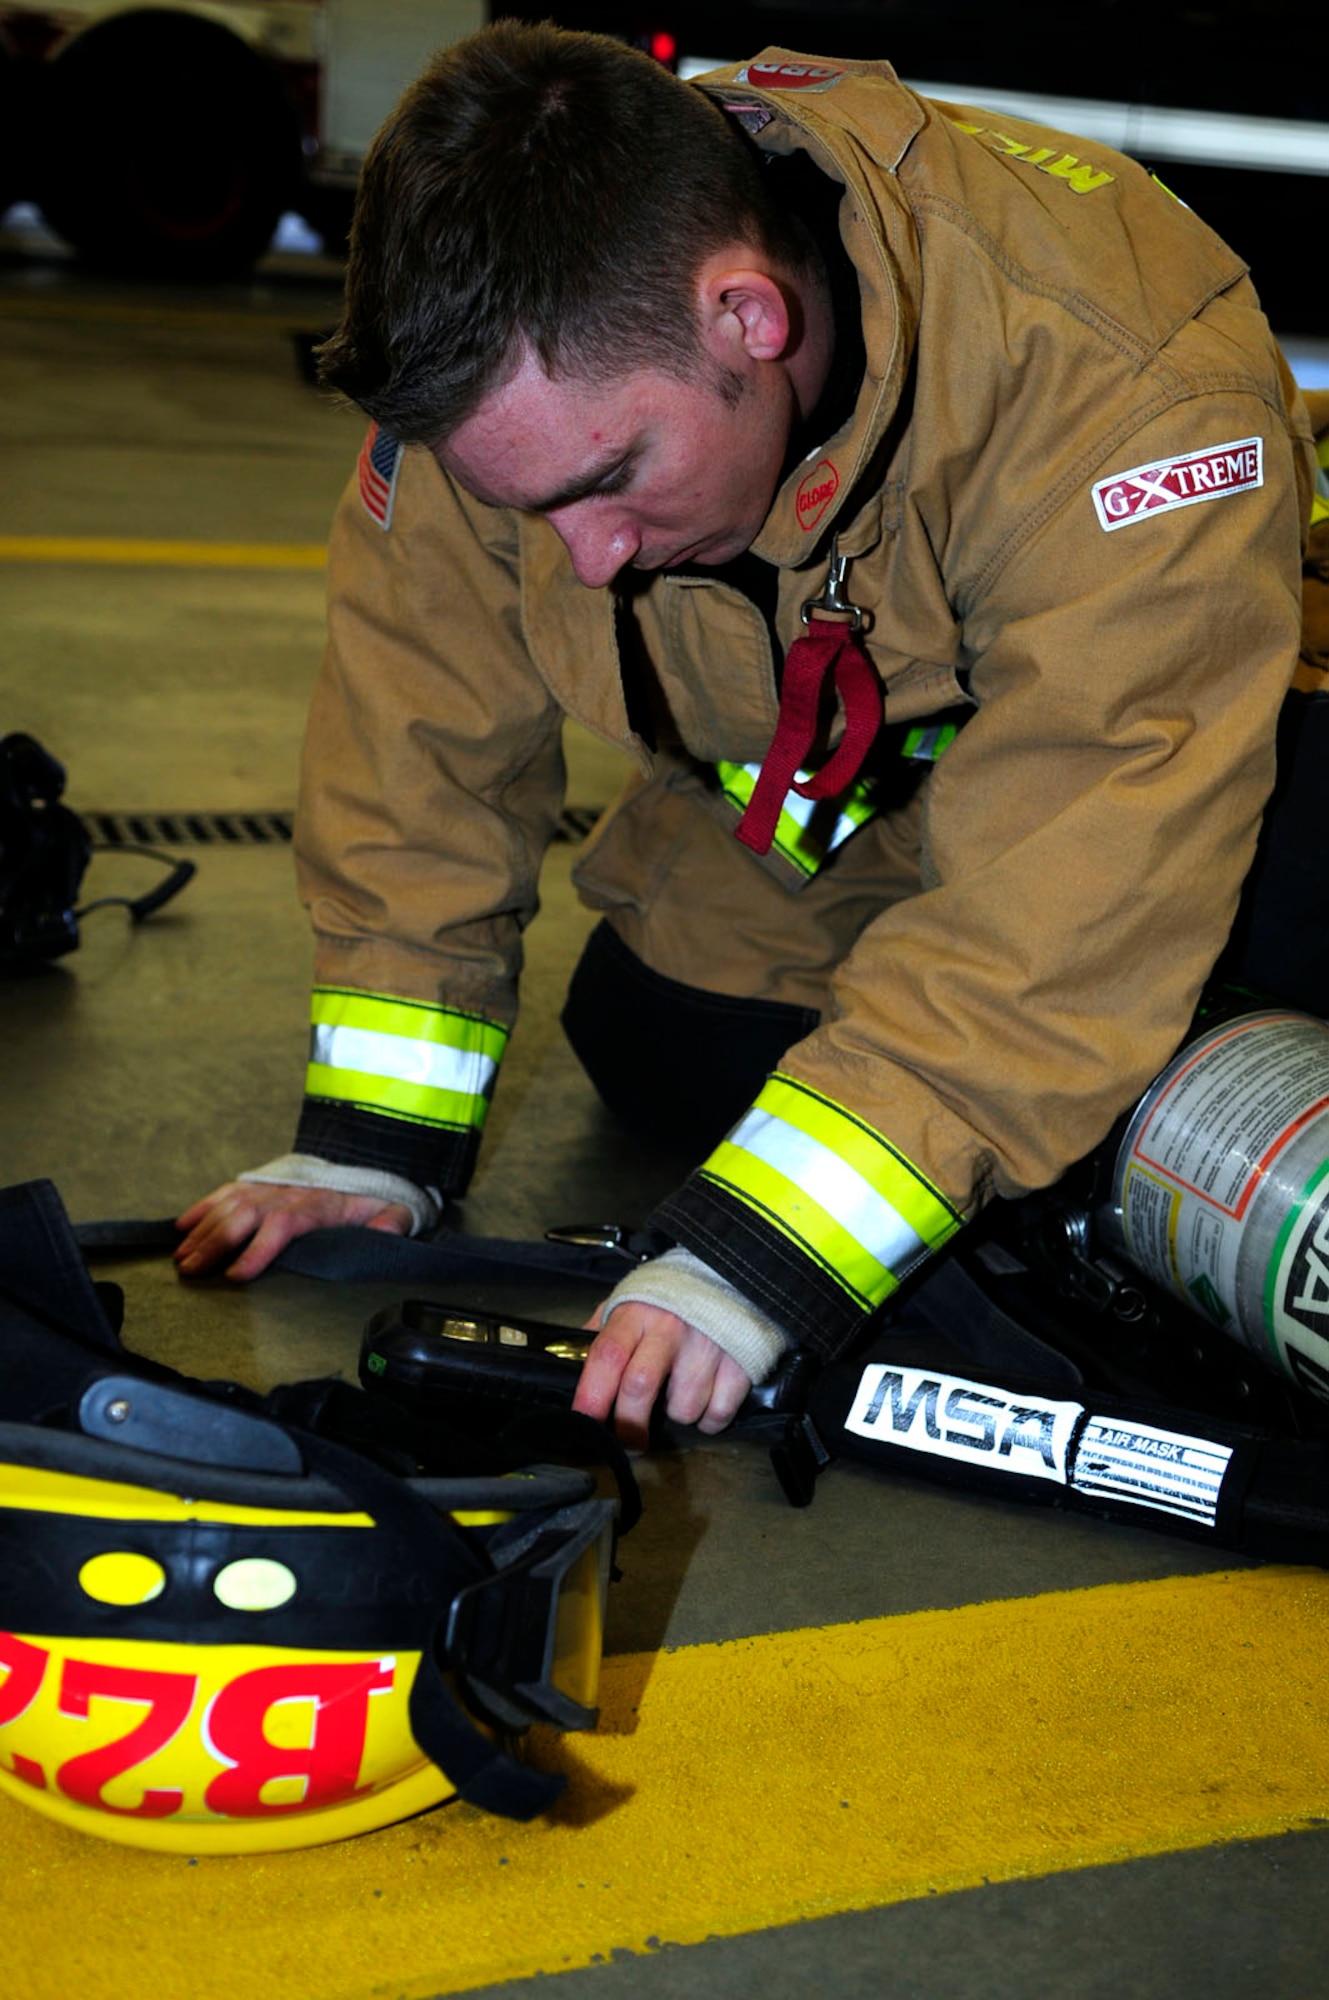 U.S. Air Force Tech. Sgt. Noah Leiter, 100th Civil Engineer Squadron Fire Department assistant chief of fire prevention from Carthage, Mo., checks the oxygen monitor on his self-contained breathing apparatus during training April 14, 2014, on RAF Mildenhall, England. All 100th CES firefighters are performing SCBA training throughout April. In addition to reviewing a written training plan, they have to complete a course of six stations while working in pairs, including carrying a simulated casualty, using a rope to hoist a rolled hose to the top of a flight of stairs, and climbing up and down a ladder twice, all while wearing an SCBA and full personal protective equipment. (U.S. Air Force photo by Karen Abeyasekere/Released)